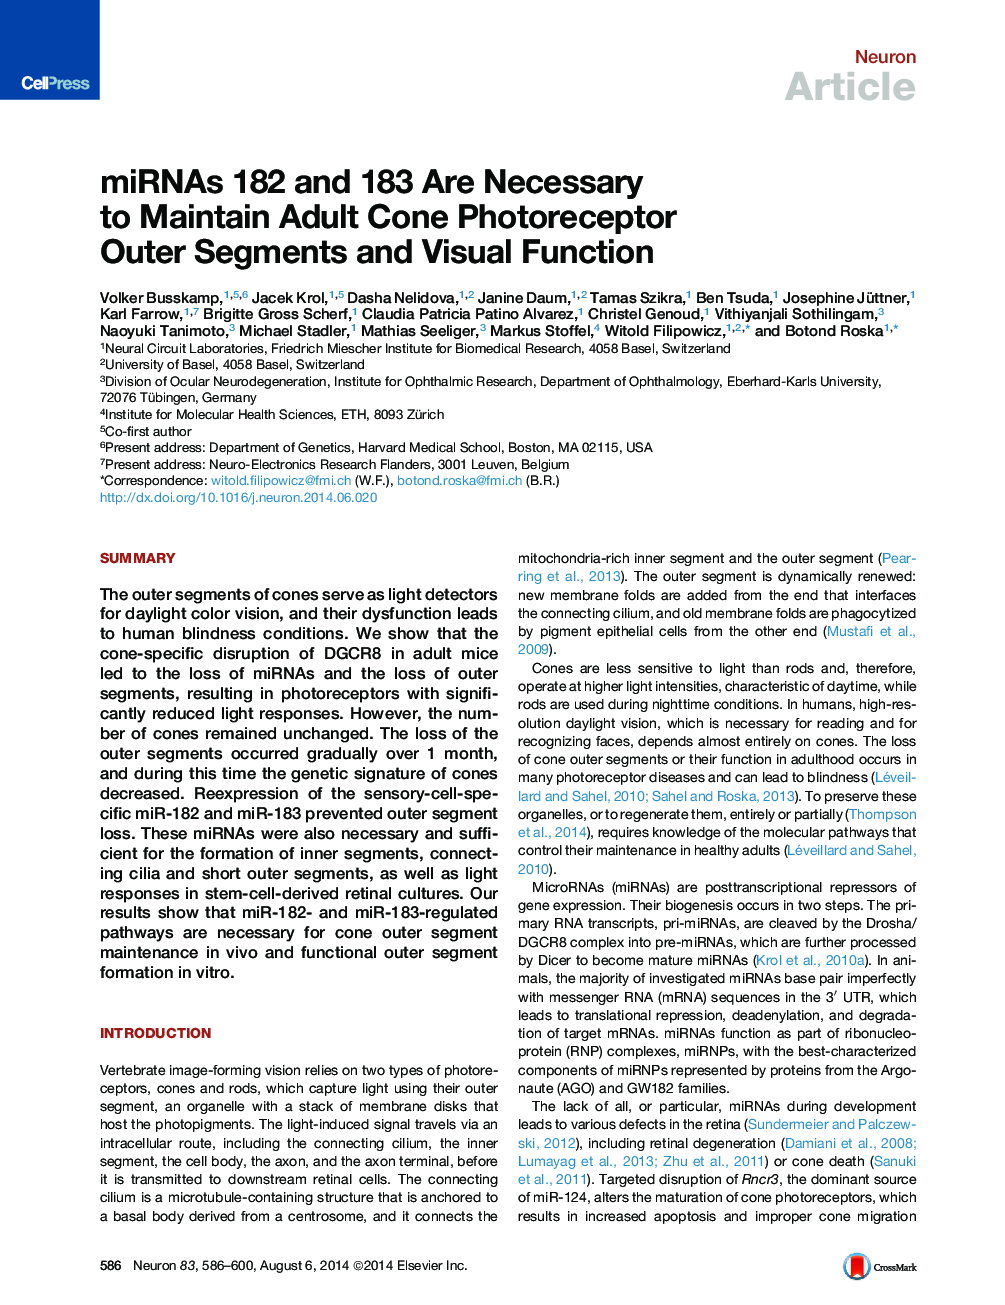 miRNAs 182 and 183 Are Necessary to Maintain Adult Cone Photoreceptor Outer Segments and Visual Function